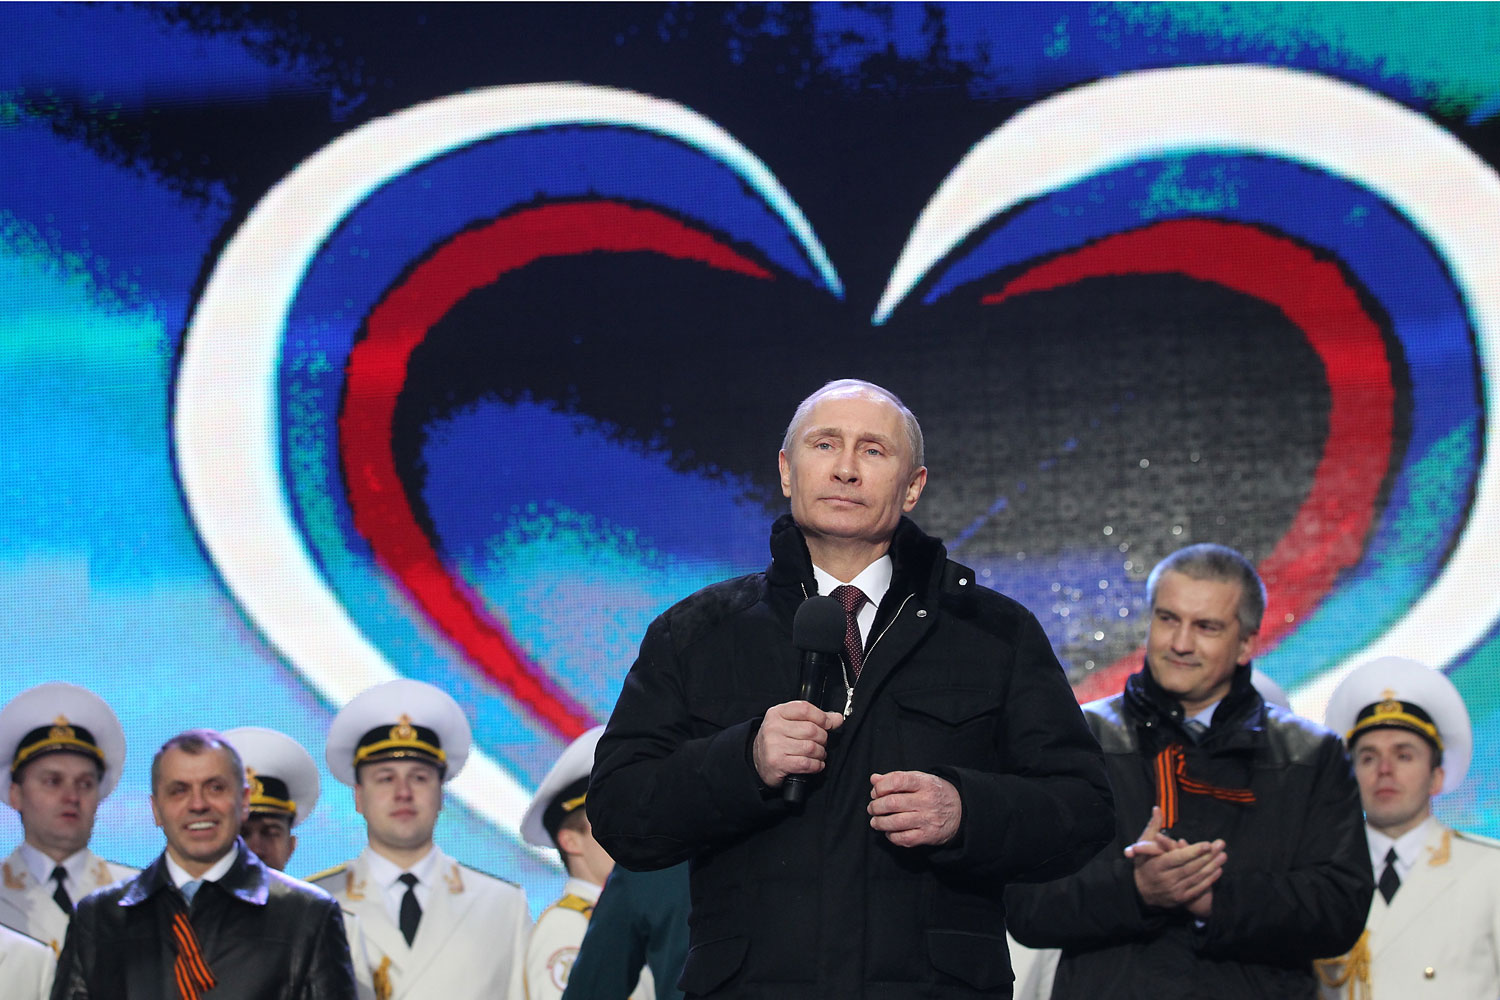 Russian President Vladimir Putin and Crimean Prime Minister Sergei Aksyonov attend a rally at Red Square on March 18, 2014 in Moscow.